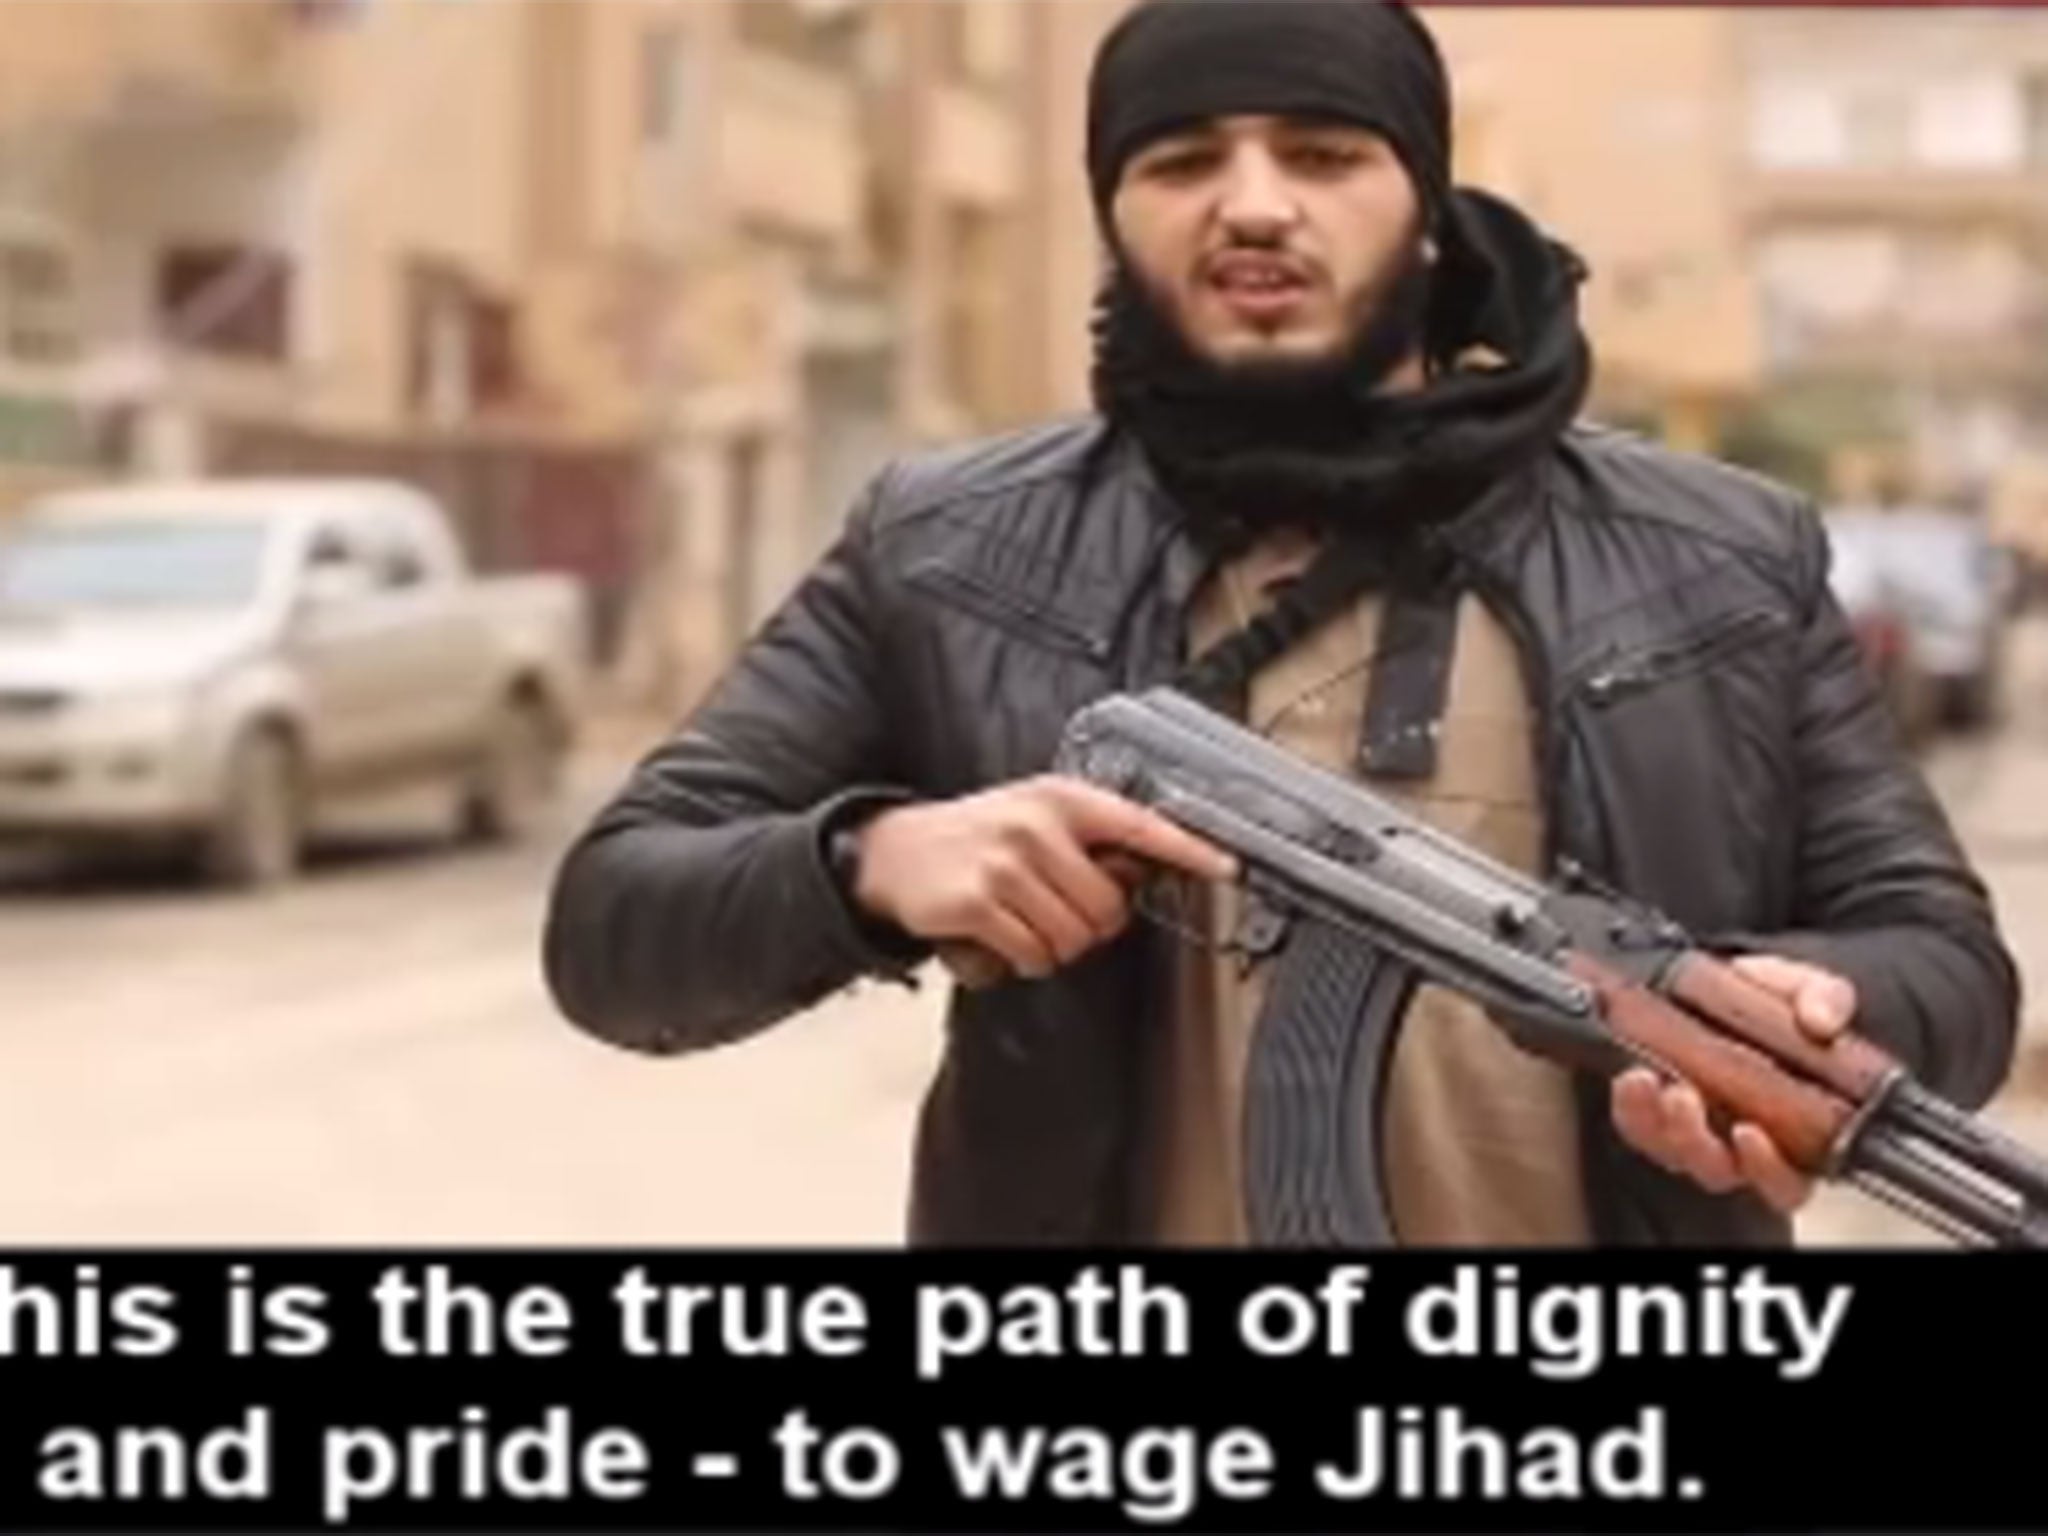 Militants shown in a video speaking French and calling on fellow extremists to carry out further attacks